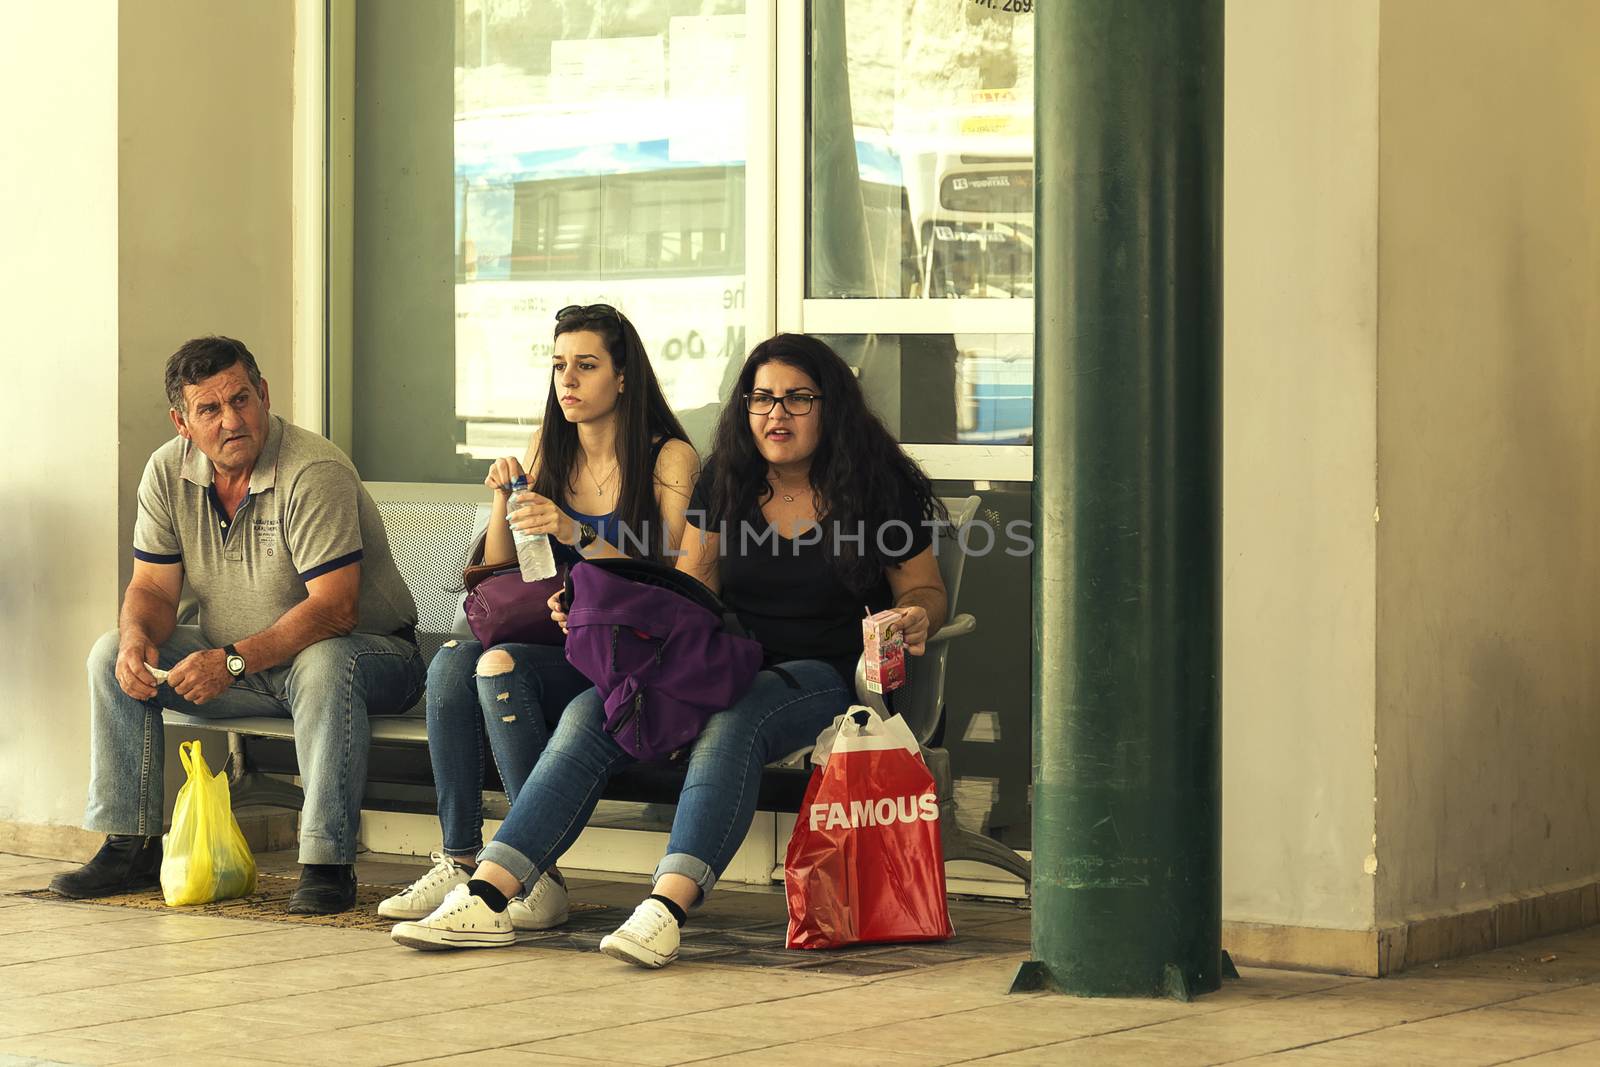 Greece, Zakynthos Island - June 17, 2016: Two young girls and an elderly man sit on a bench in a bus lazy